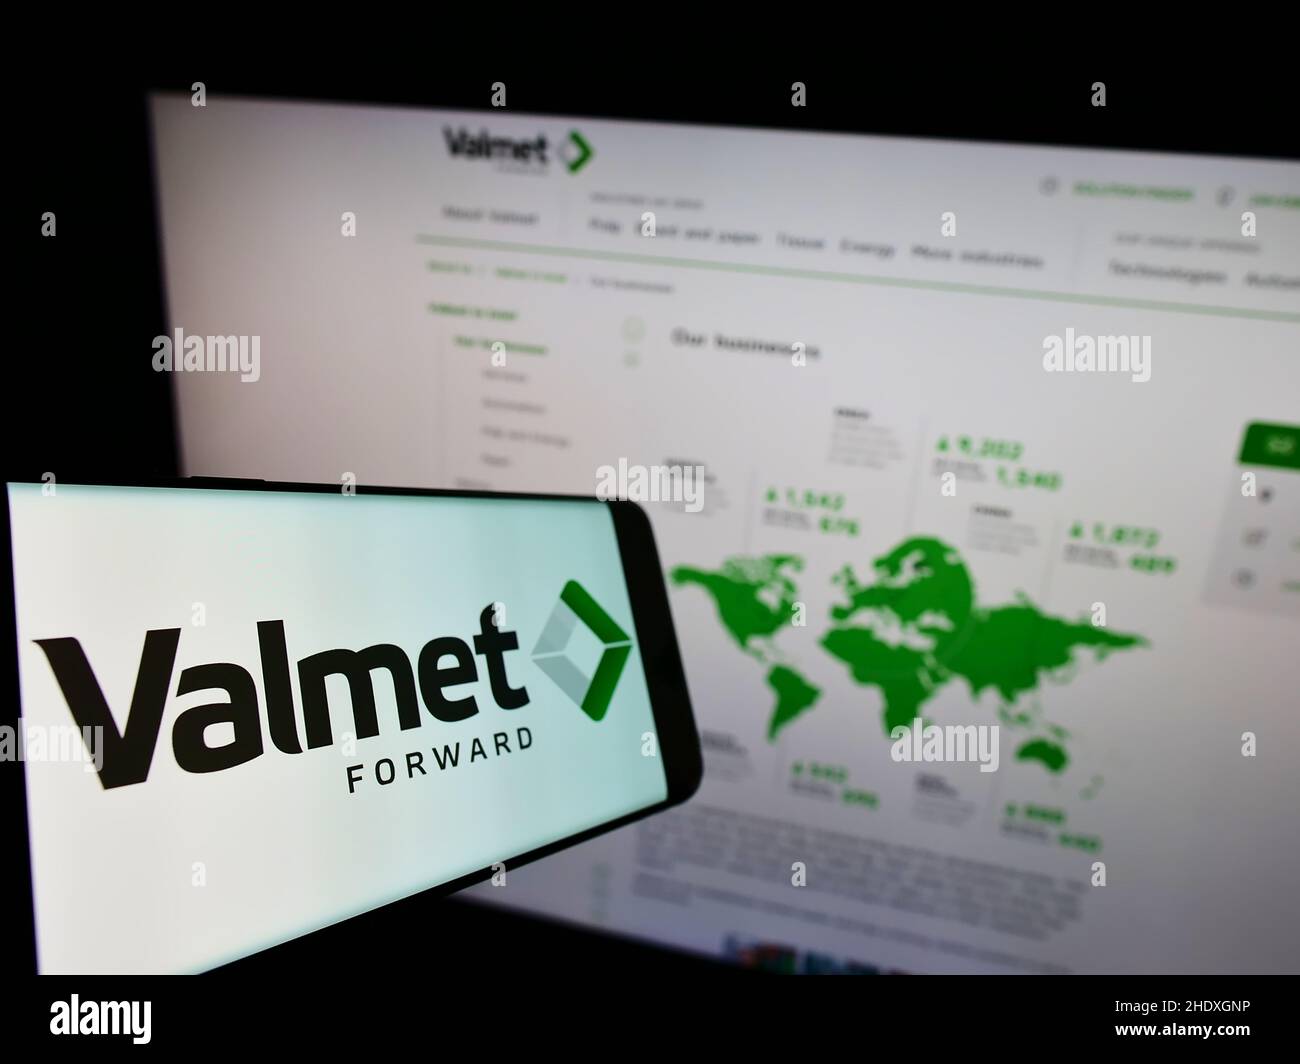 Mobile phone with logo of Finnish engineering company Valmet Oyj on screen in front of business website. Focus on center-left of phone display. Stock Photo